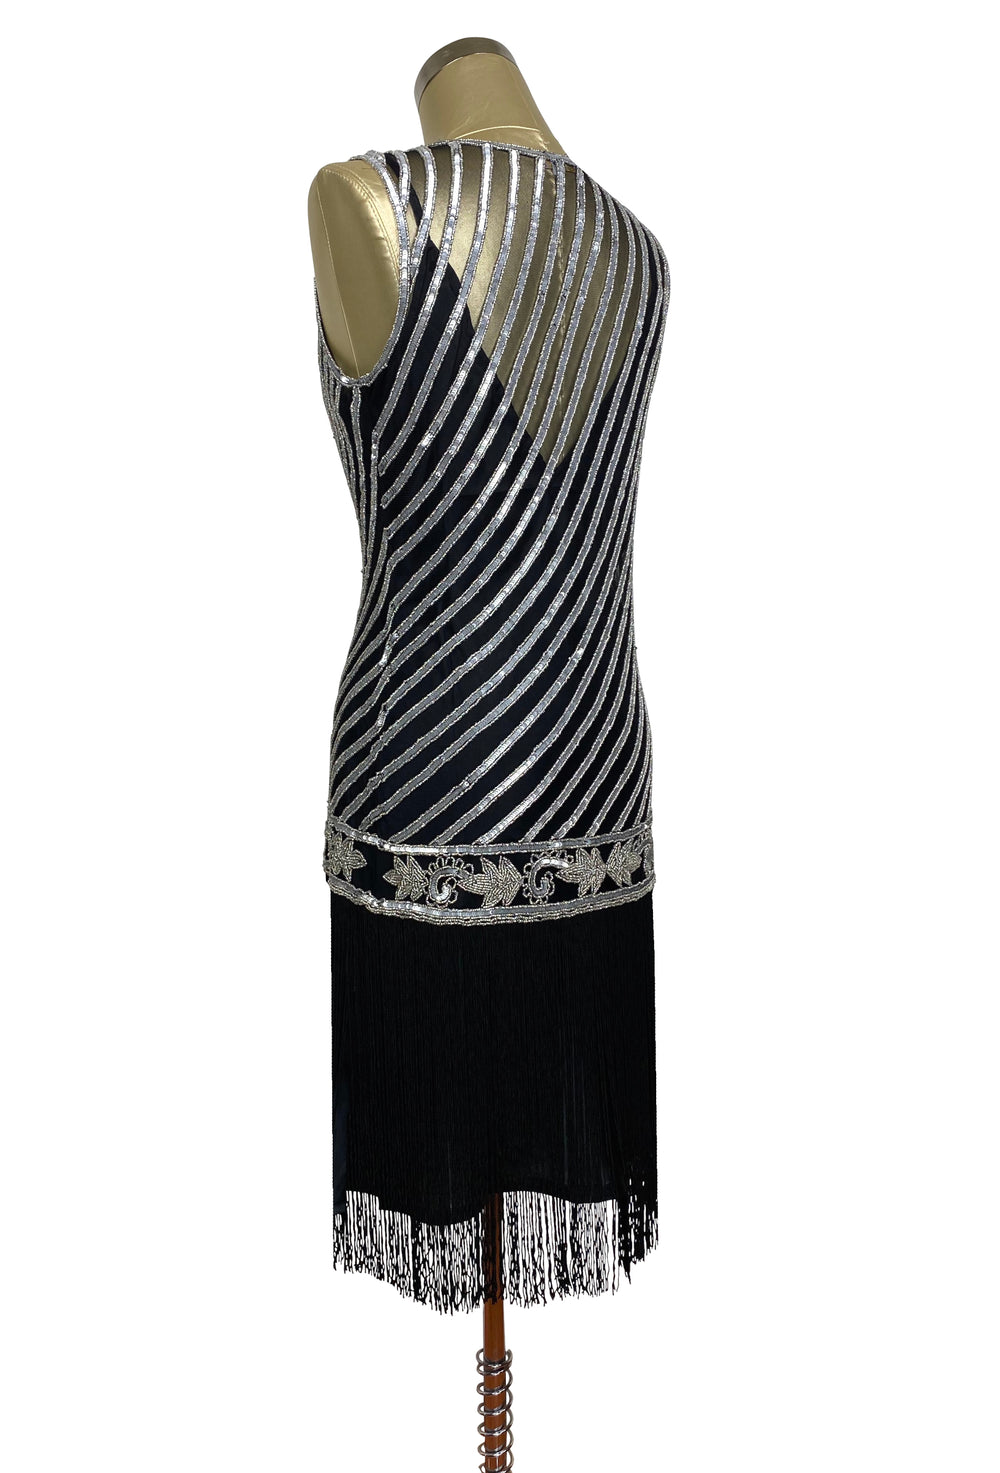 1920's Style Flapper Fringe Party Dress - The Original Artist Silver on Black - Great Gatsby